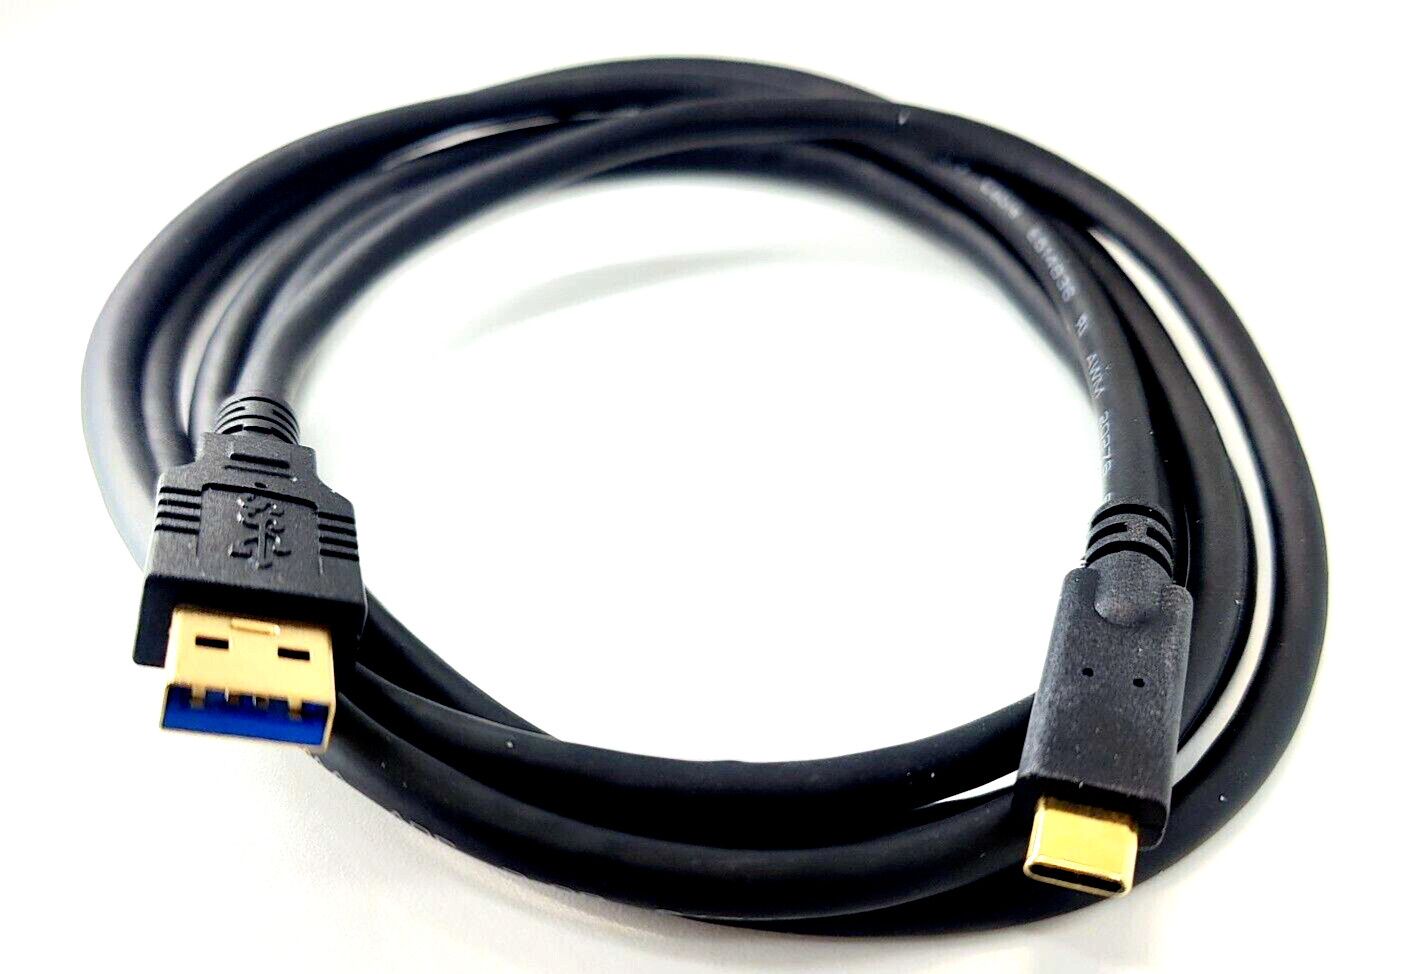 6Ft USB3.2 GEN2x1 (AKA USB3.1 GEN2) 10G TYPE-C MALE TO TYPE-A MALE CABLE